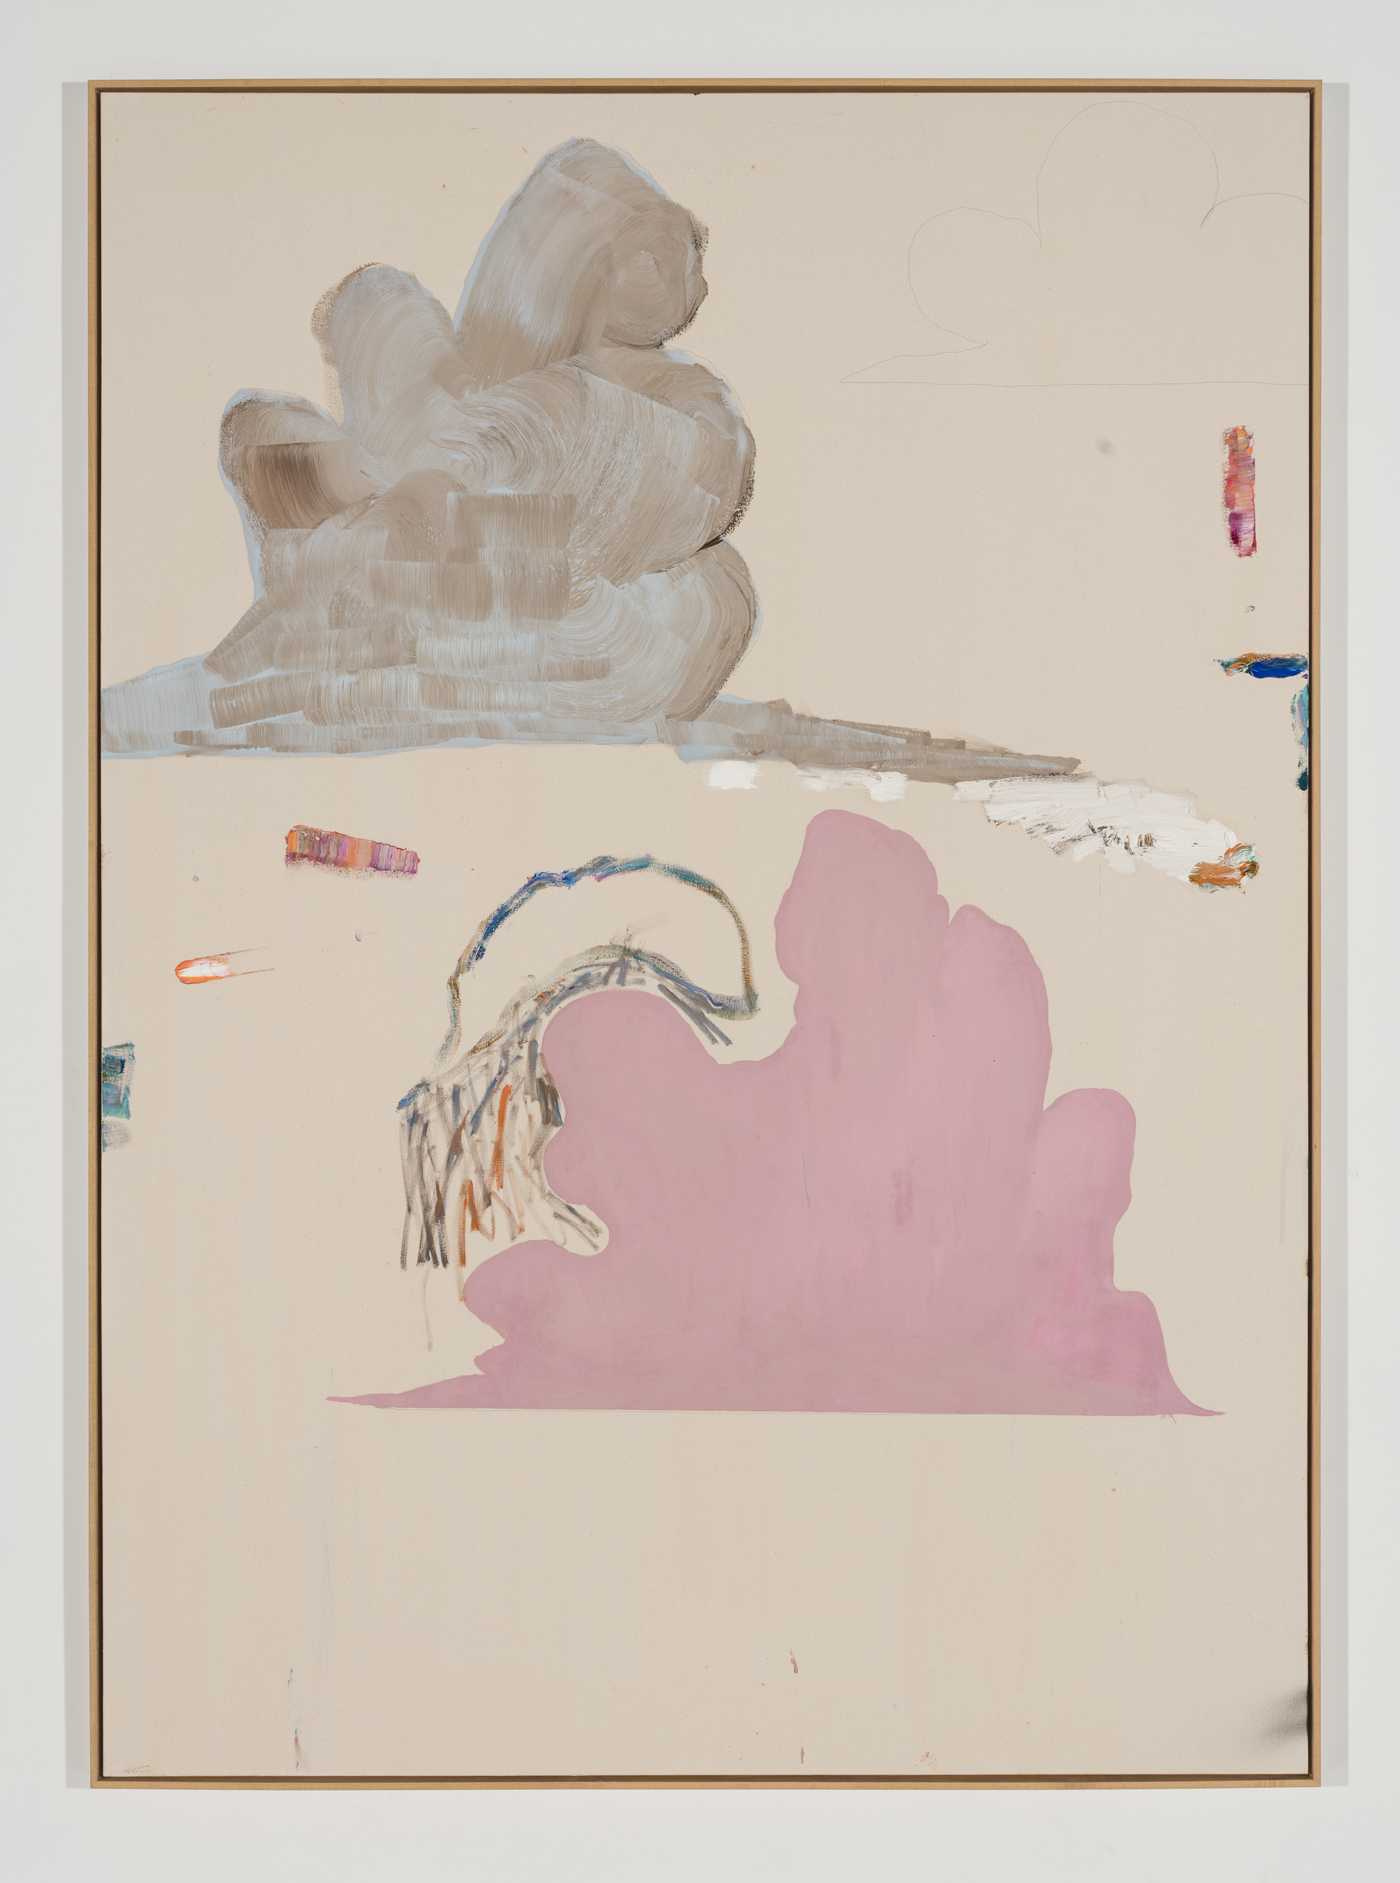 Benoît Maire, 'Cloud Painting,' 2017. Courtesy of the artist and Arsenal Contemporary, New York. Photography by Richard-Max Tremblay.